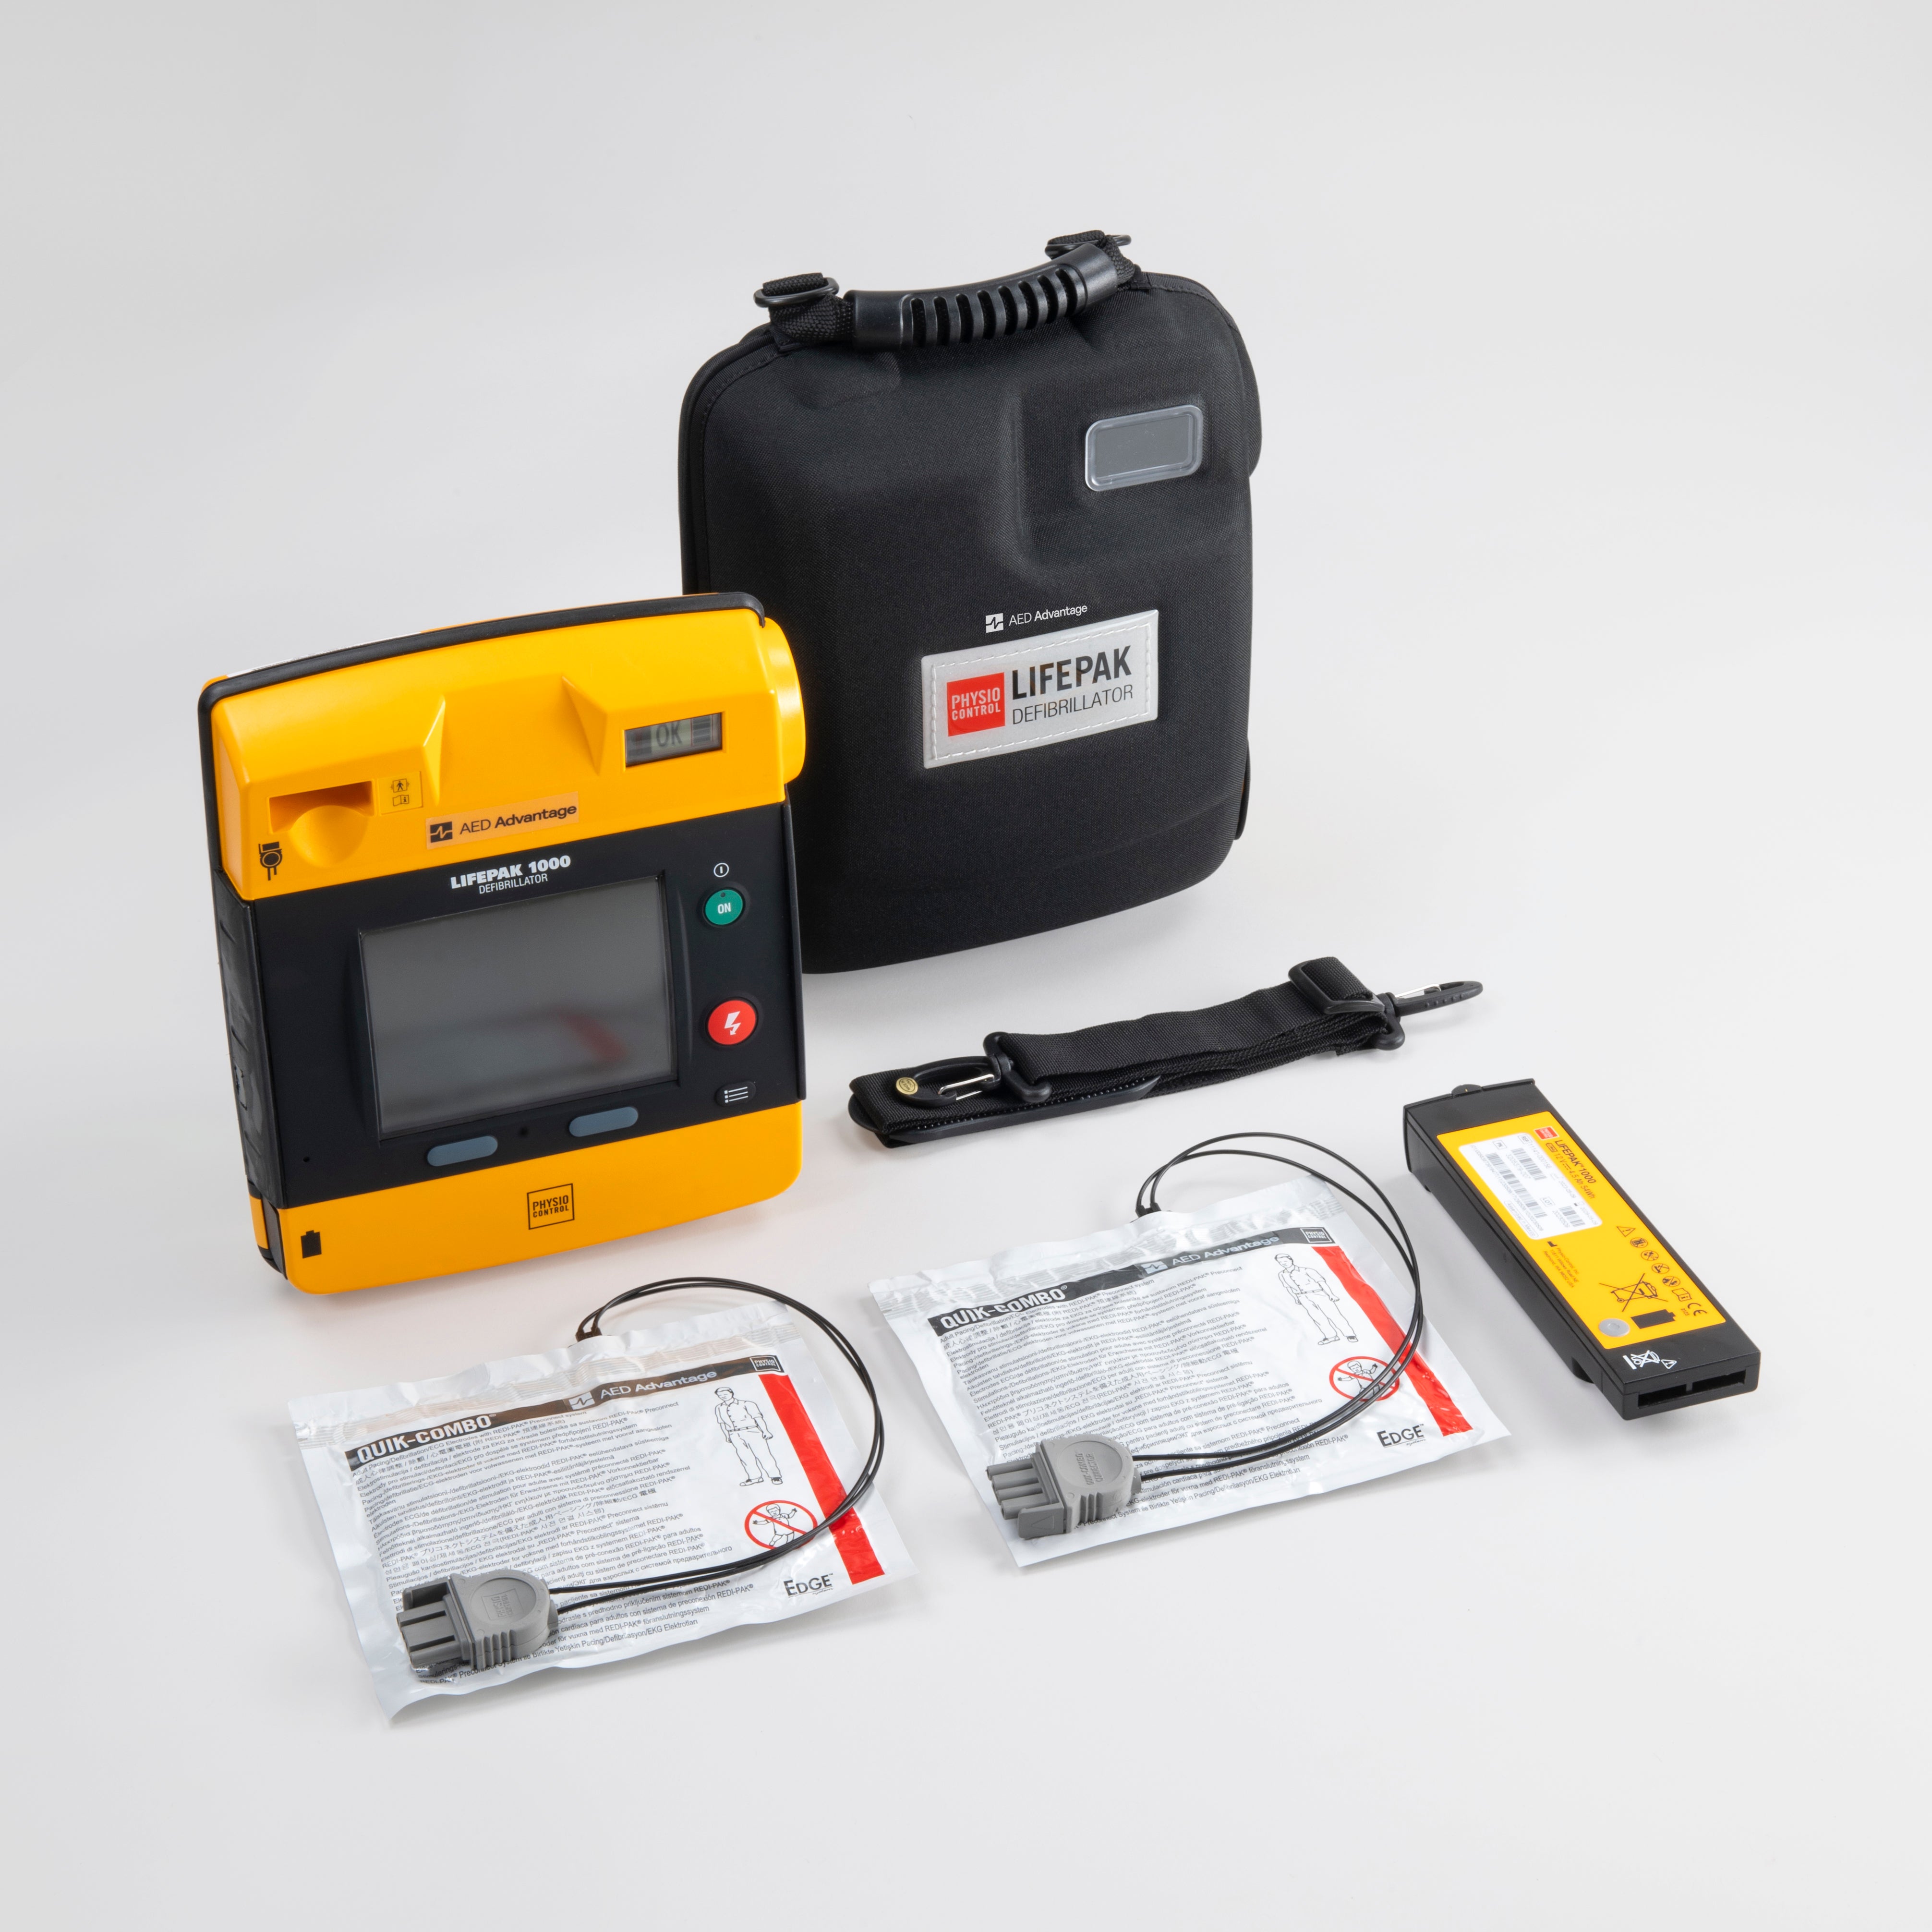 A black and yellow LIFEPAK 1000 AED with its black carry case, two electrode pads, and a battery